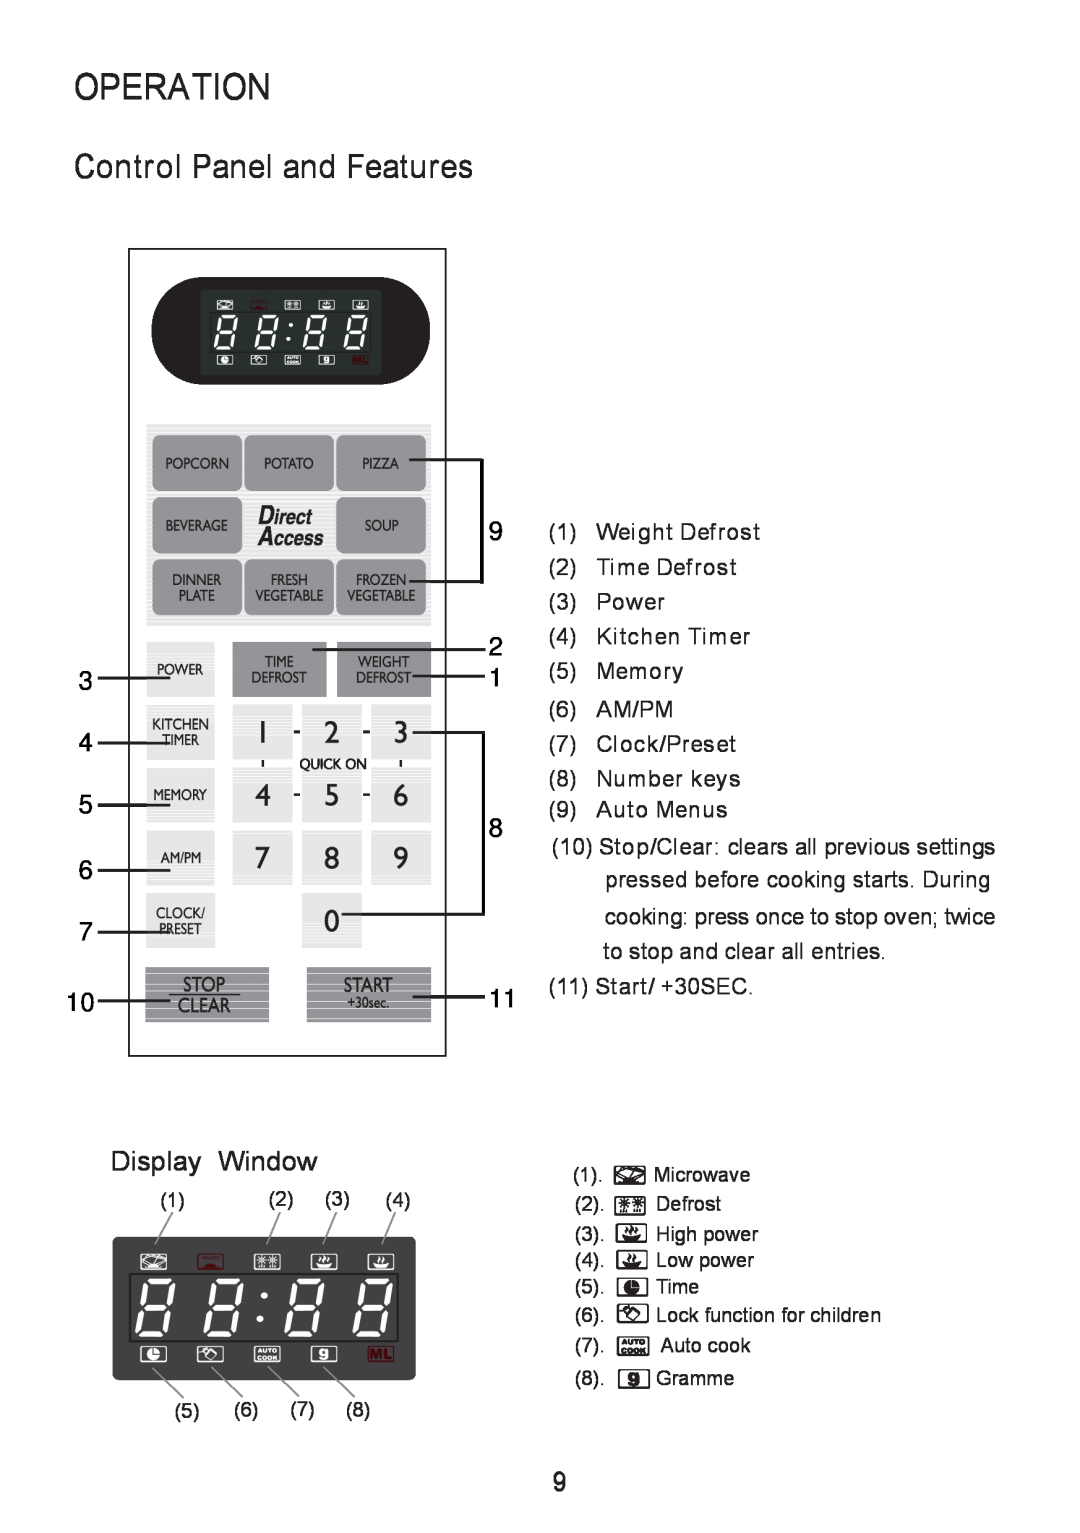 Sanyo EM-S8586V instruction manual Operation, Control Panel and Features, Display Window 